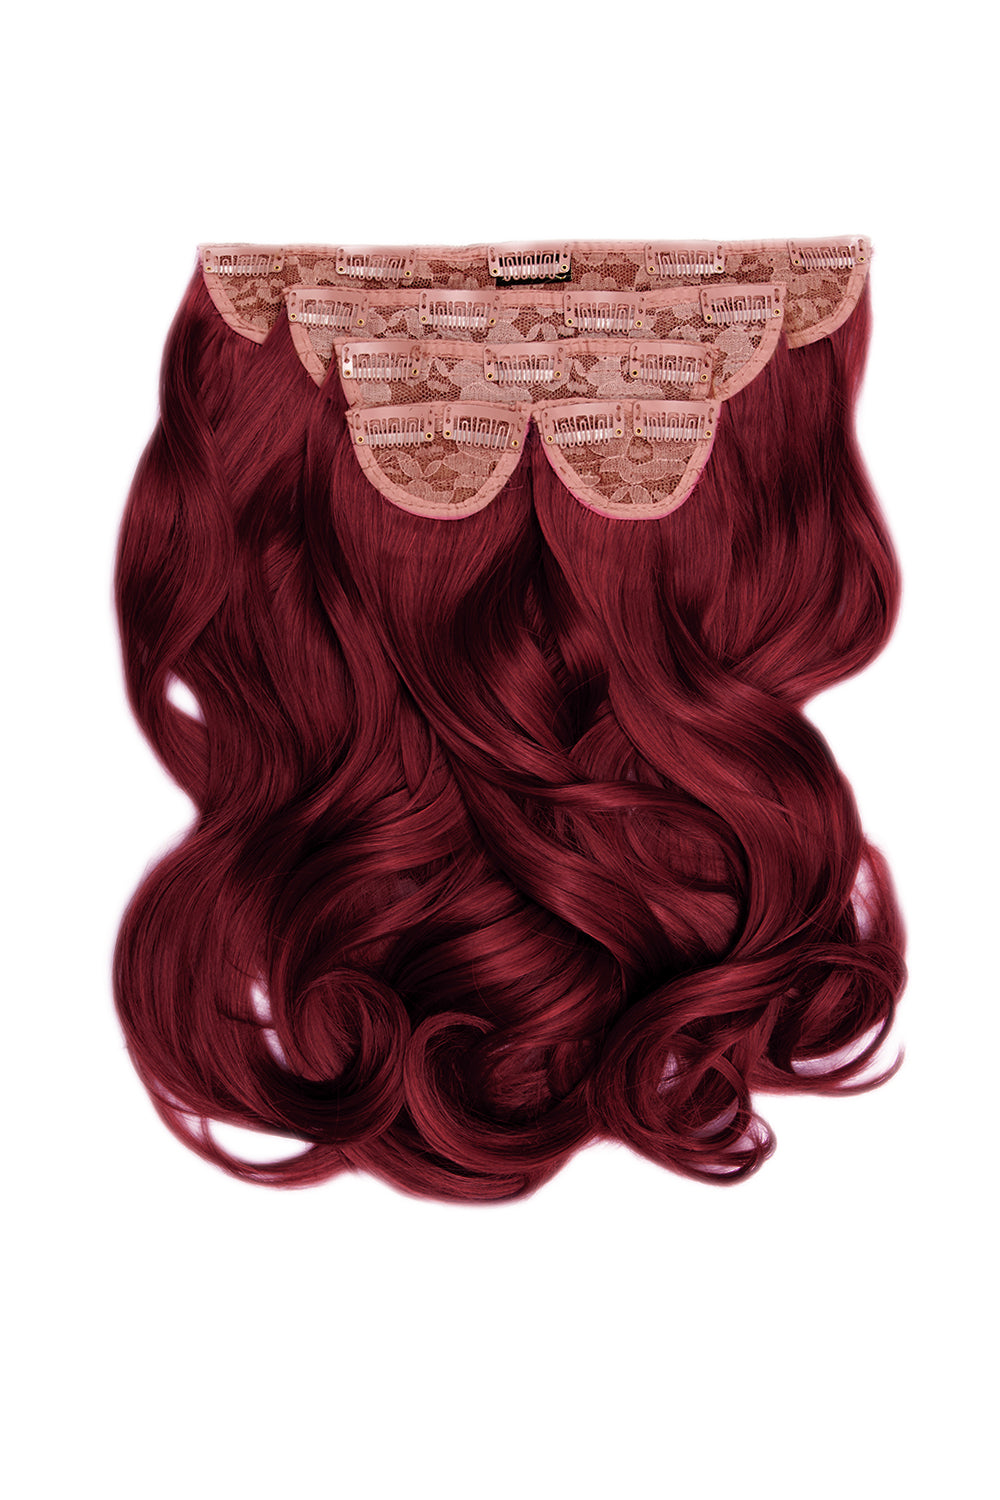 Super Thick 16" 5 Piece Blow Dry Wavy Clip In Hair Extensions - Burgundy